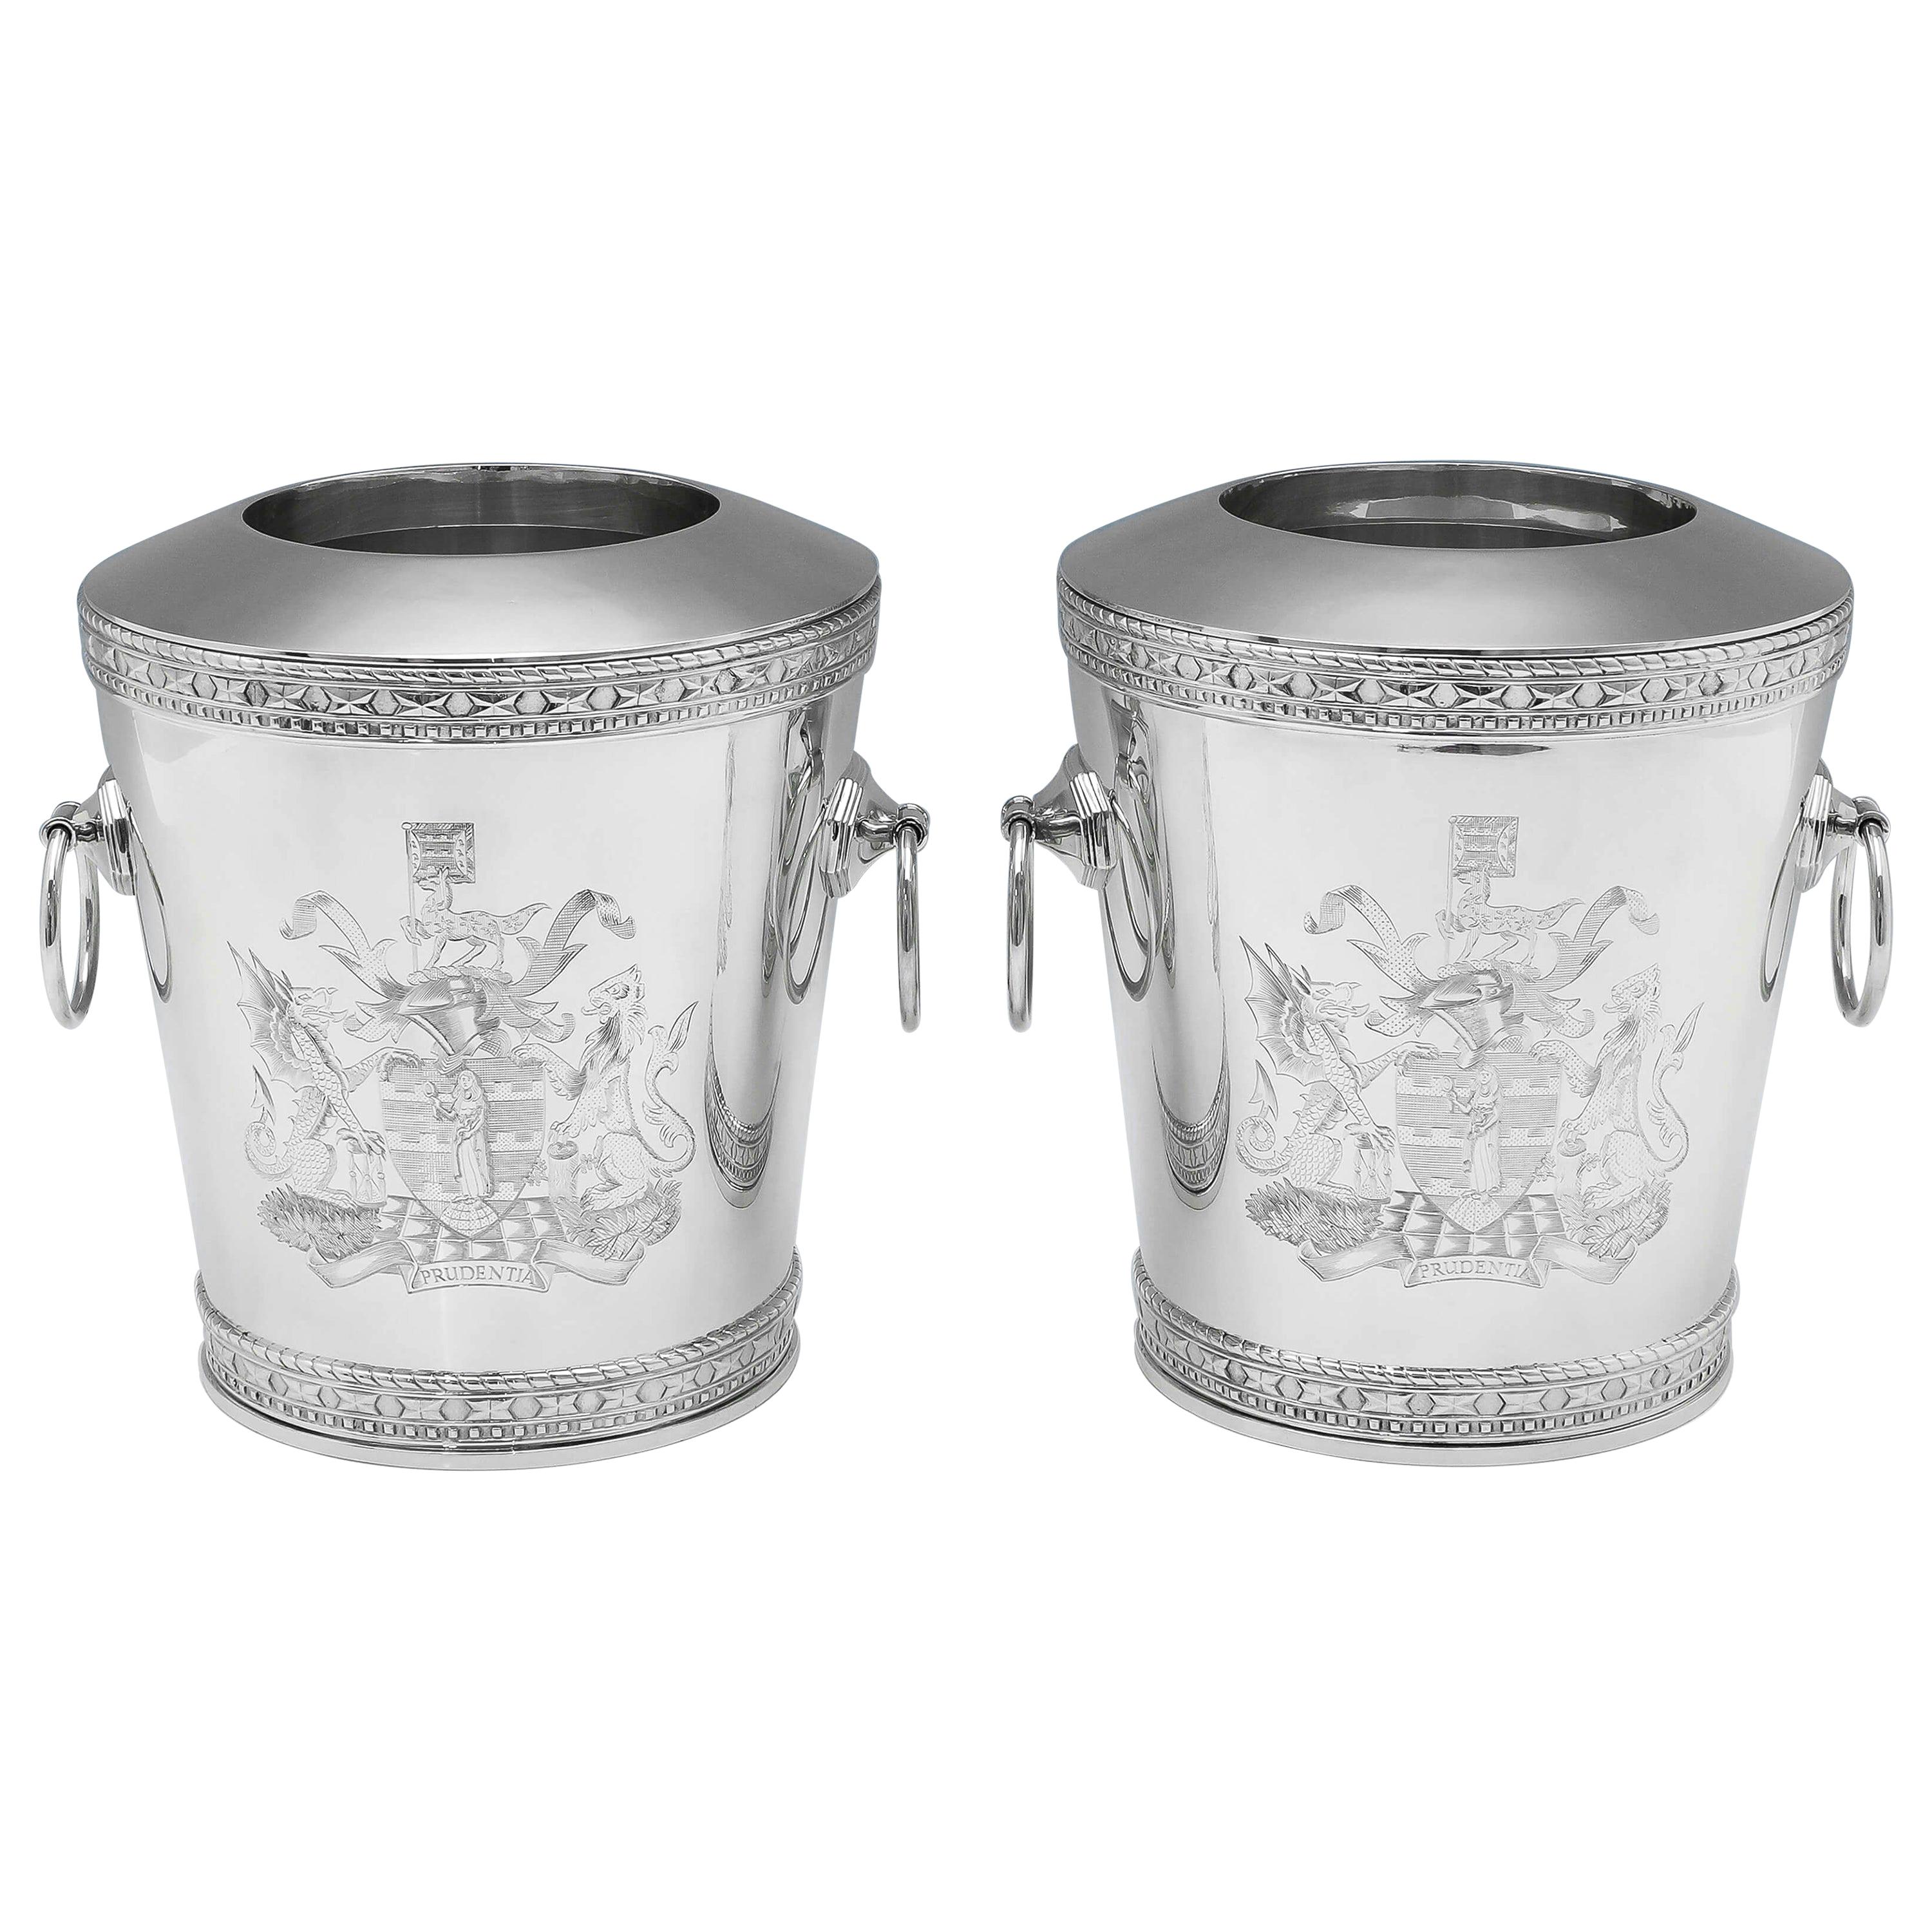 Unique Sterling Silver Pair of Wine Coolers by i. Franks in 1995 for Prudential